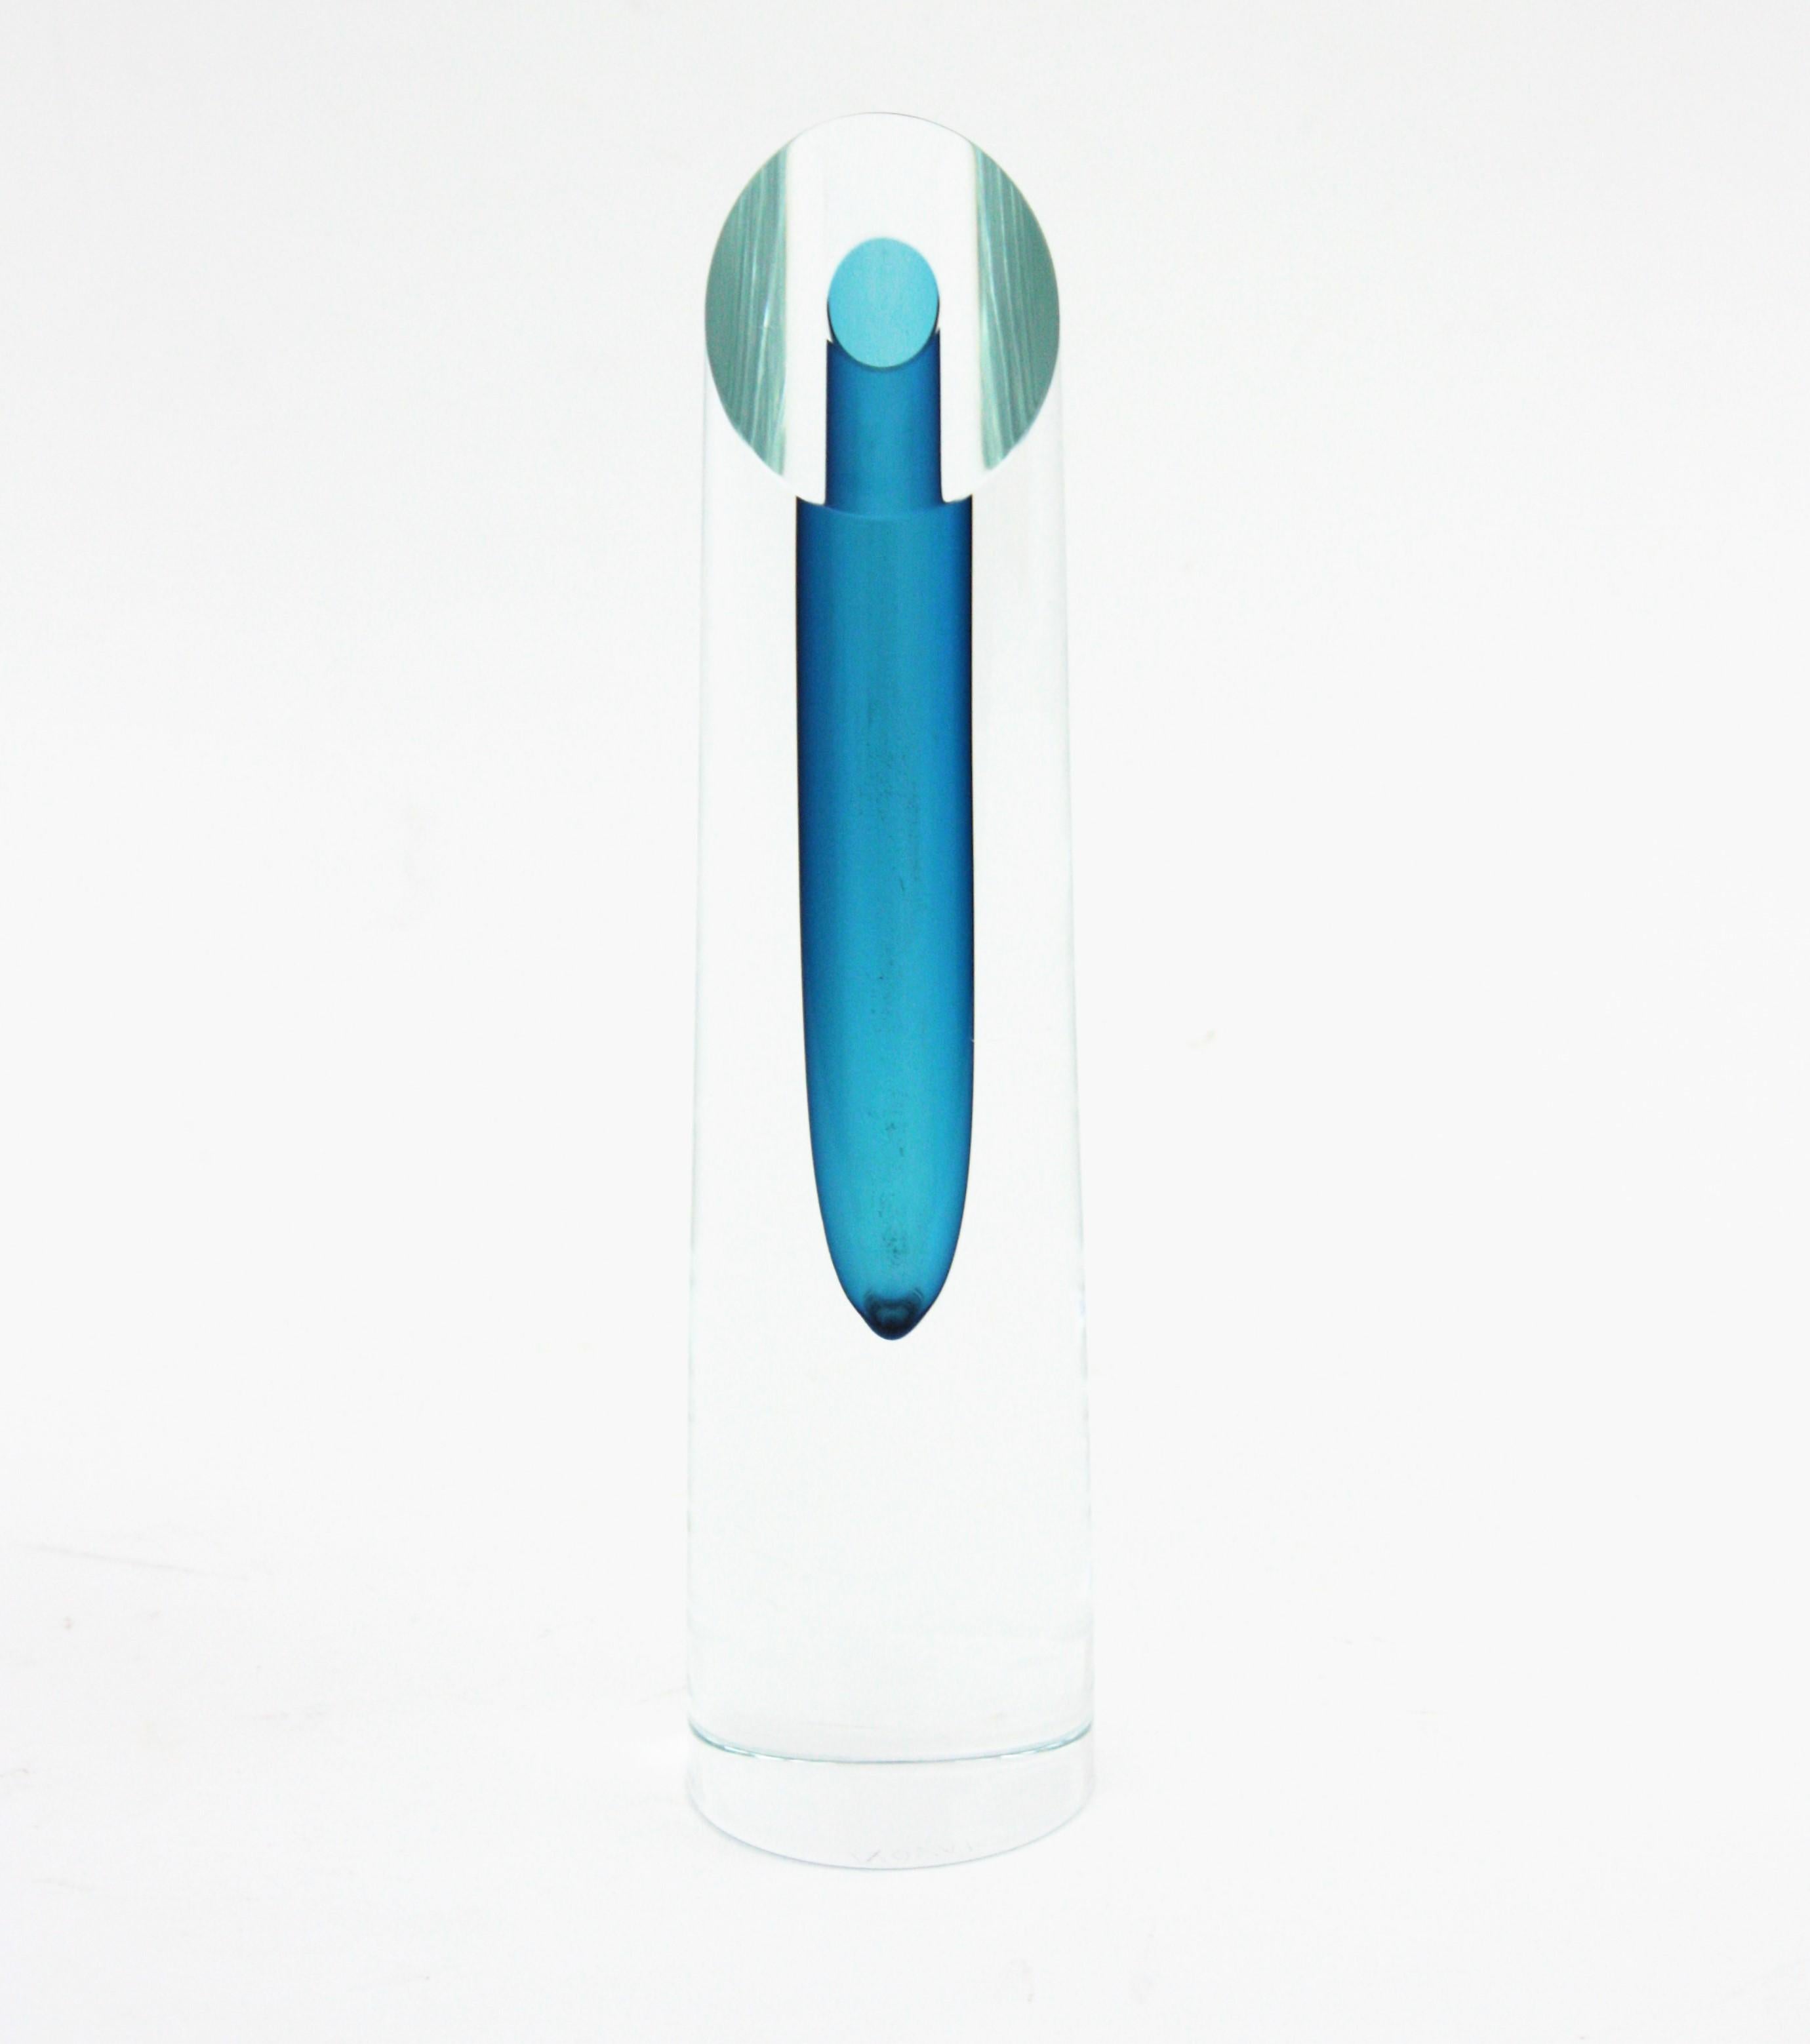 Sculptural Sommerso block vase in blue and clear glass by Bretislav Novak, Czech Republic, 1950s.
Vibrant blue glass submerged into crear lass using the Sommerso technique.
Faceted top and elegant shape.
Lovely to be used as flower vase or